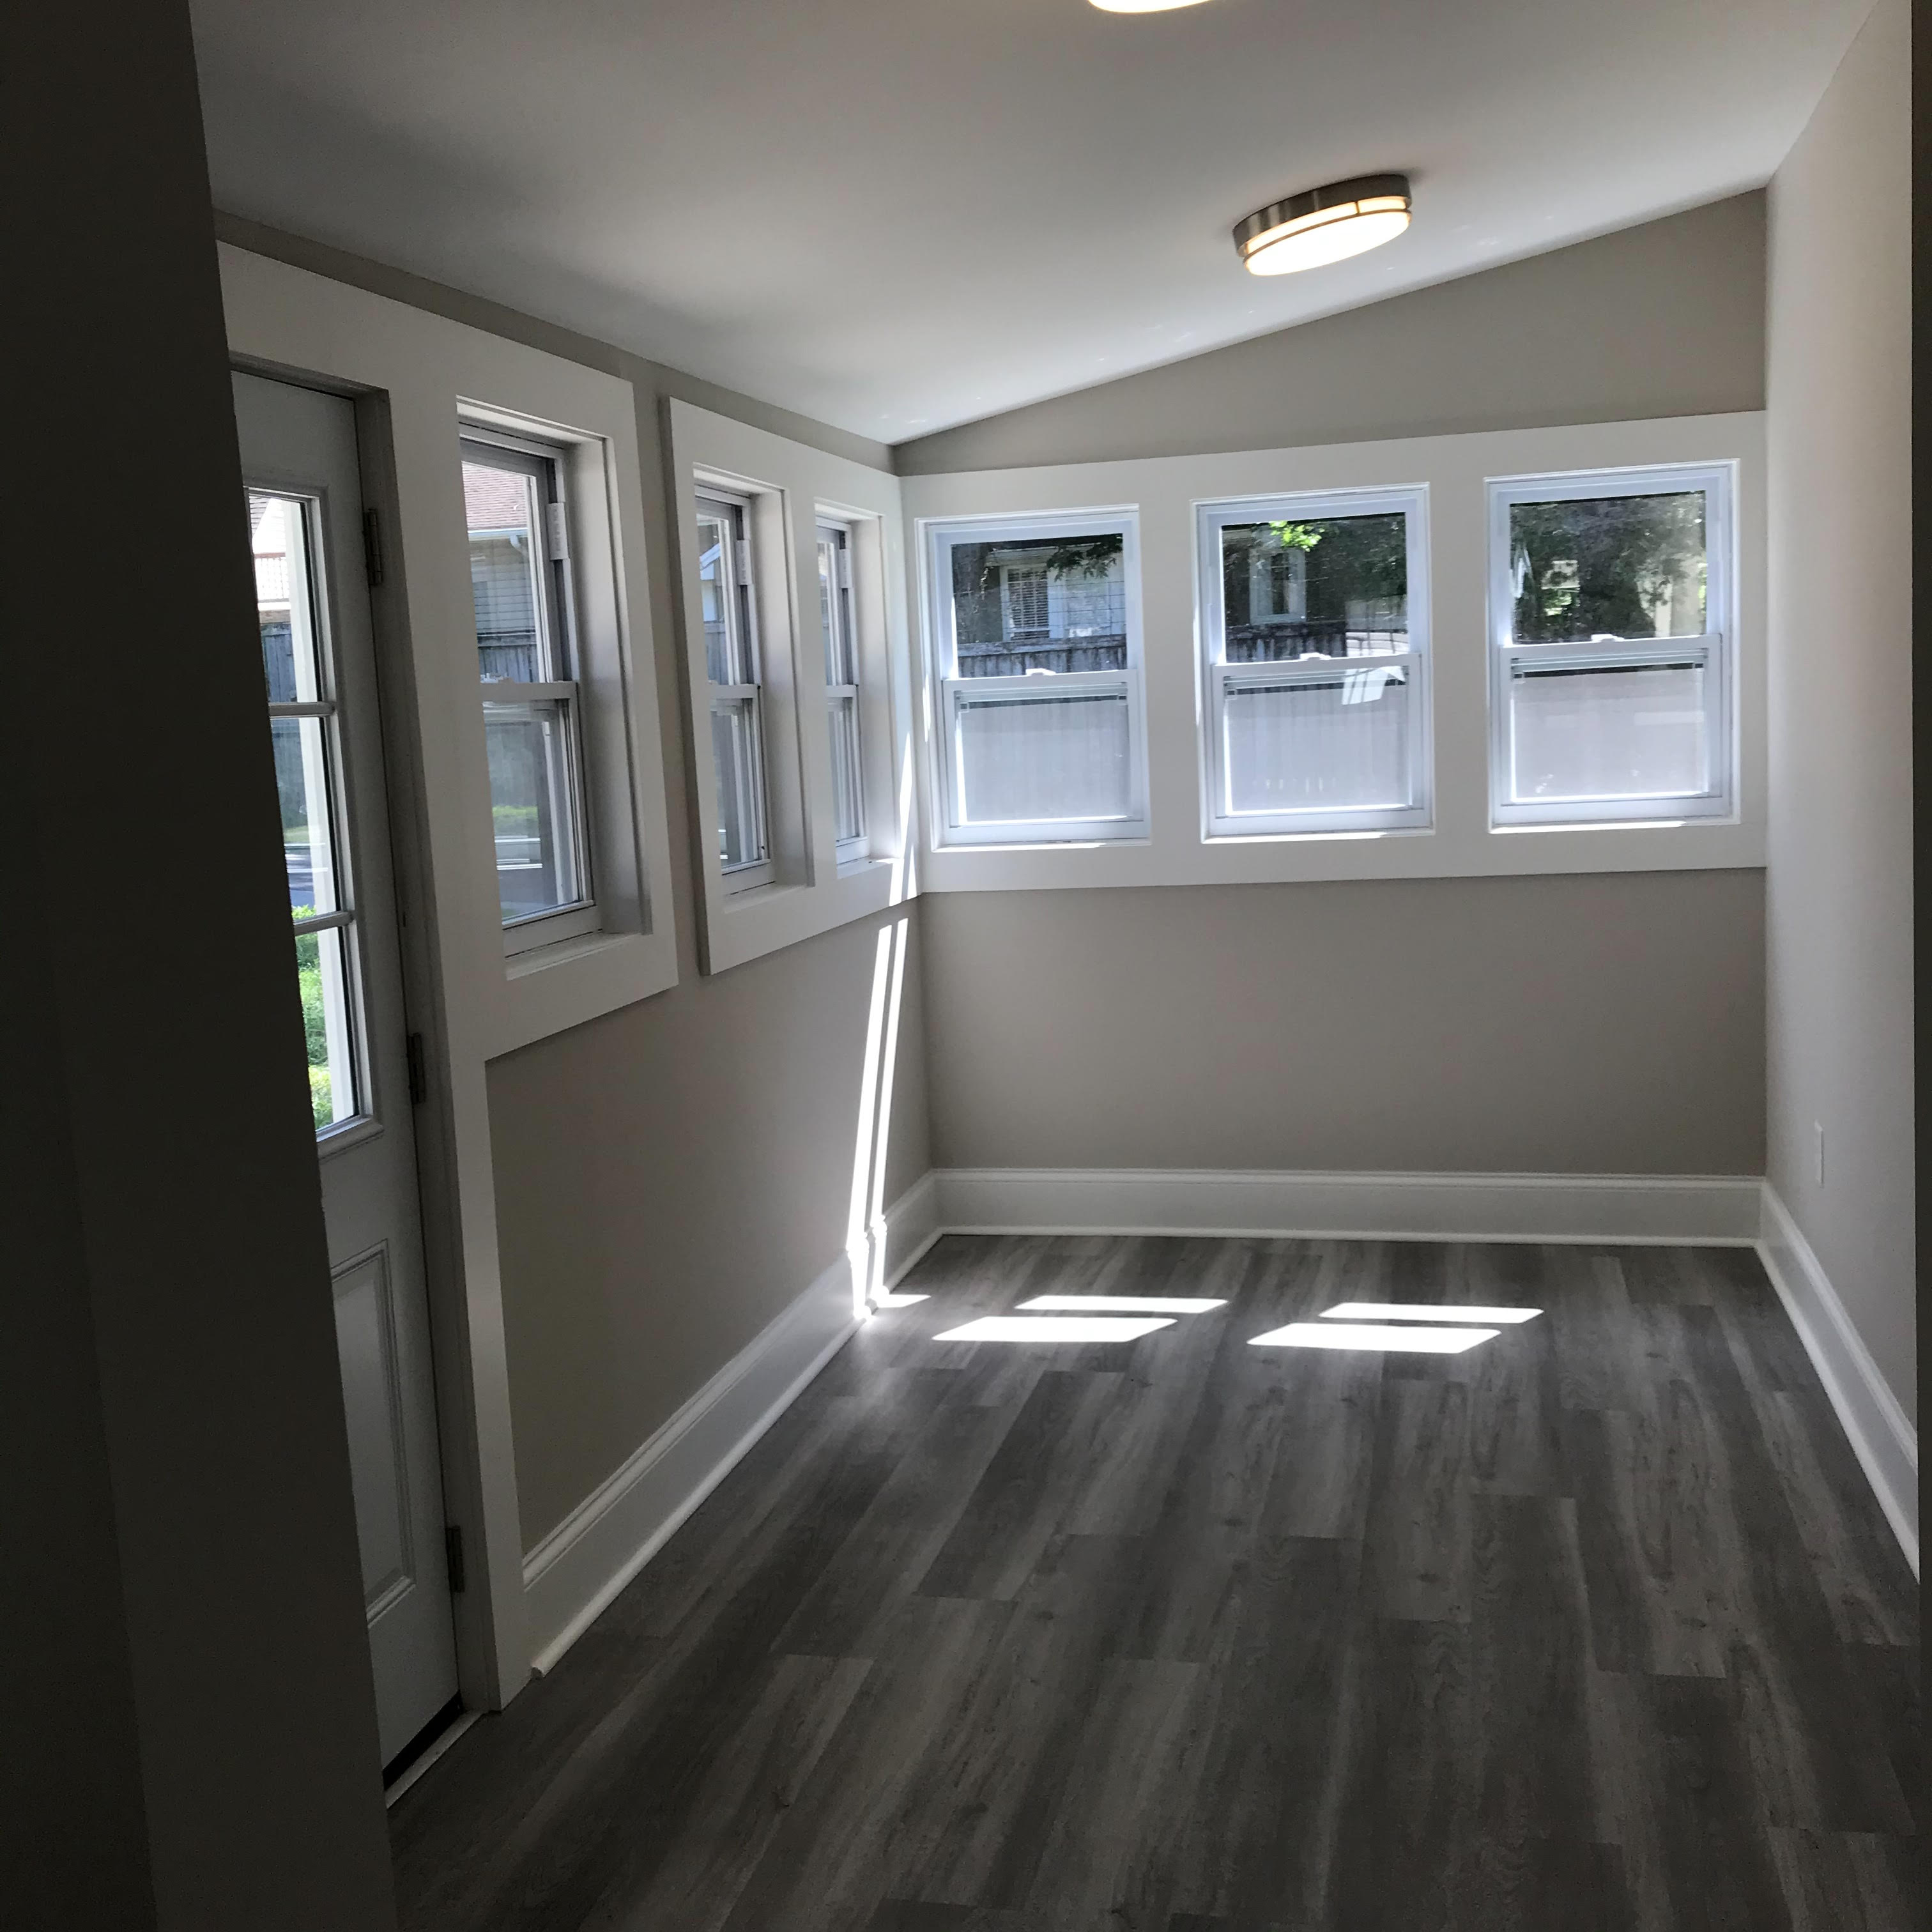 New custom built room with a lot of windows